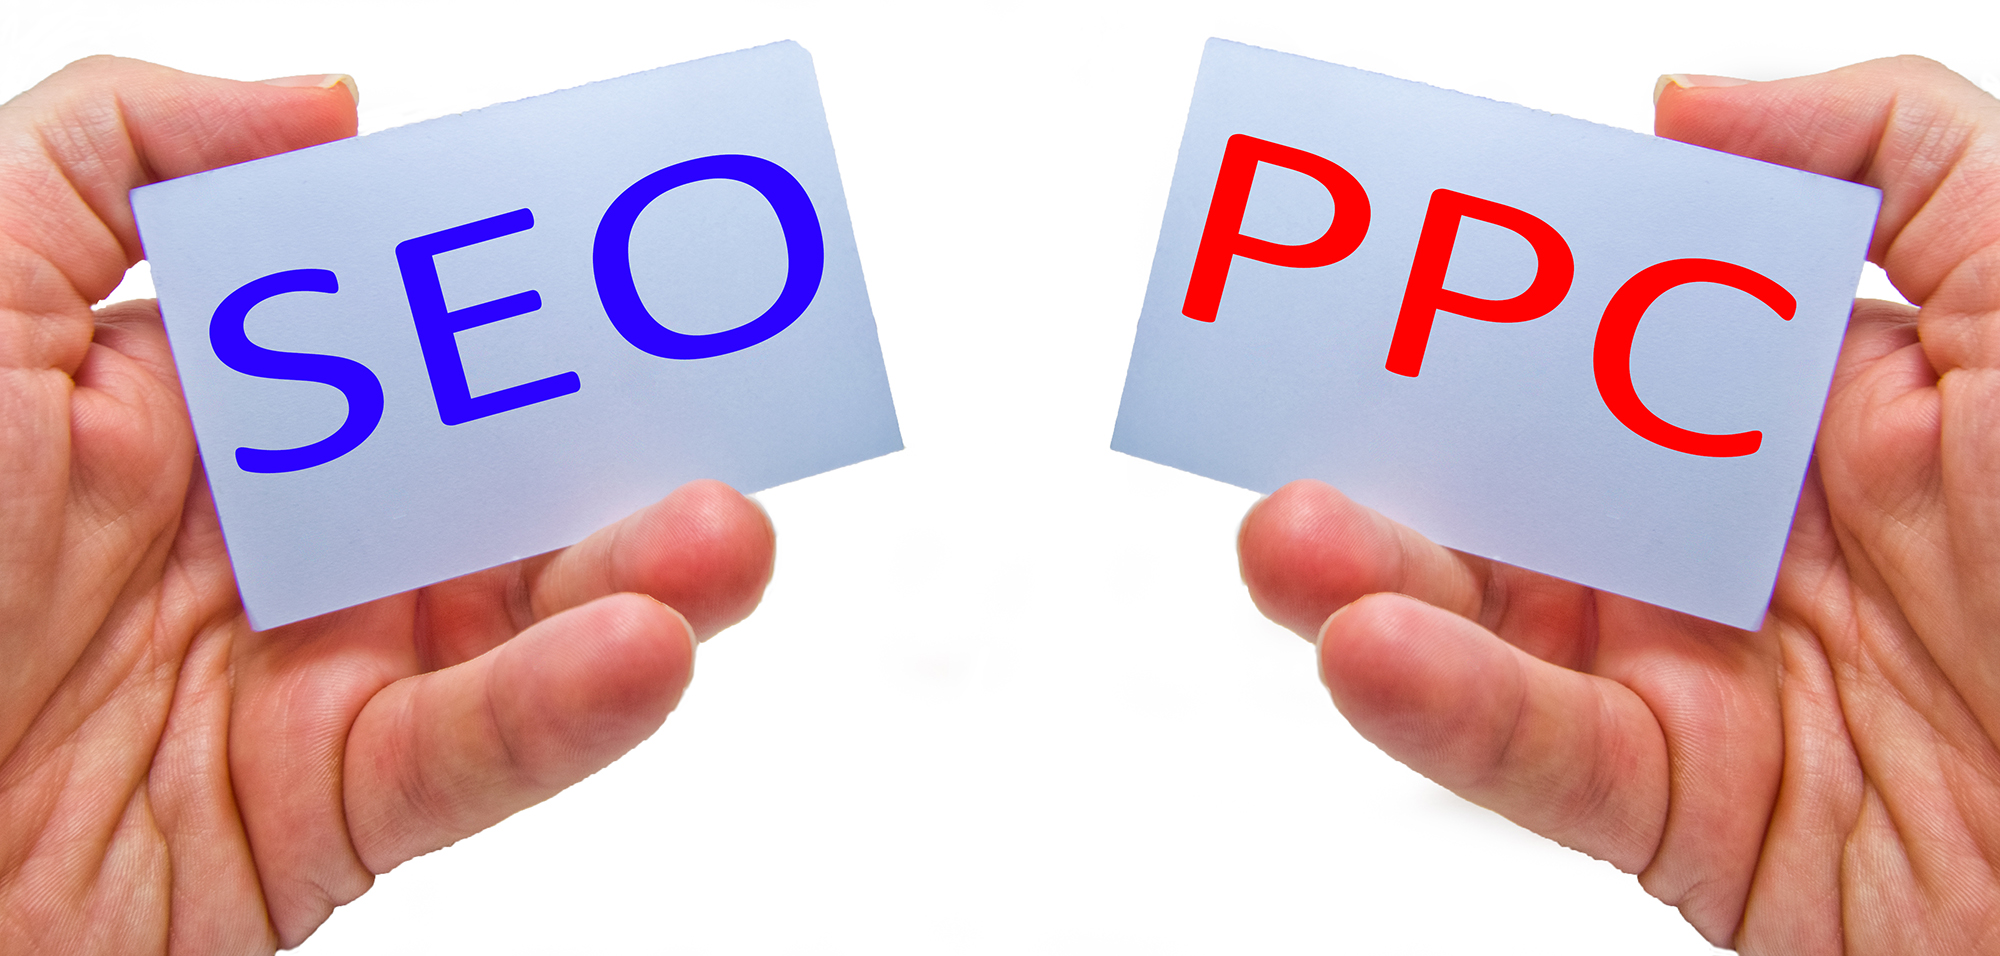 SEO vs. PPC: Which Is Right for Your Business?